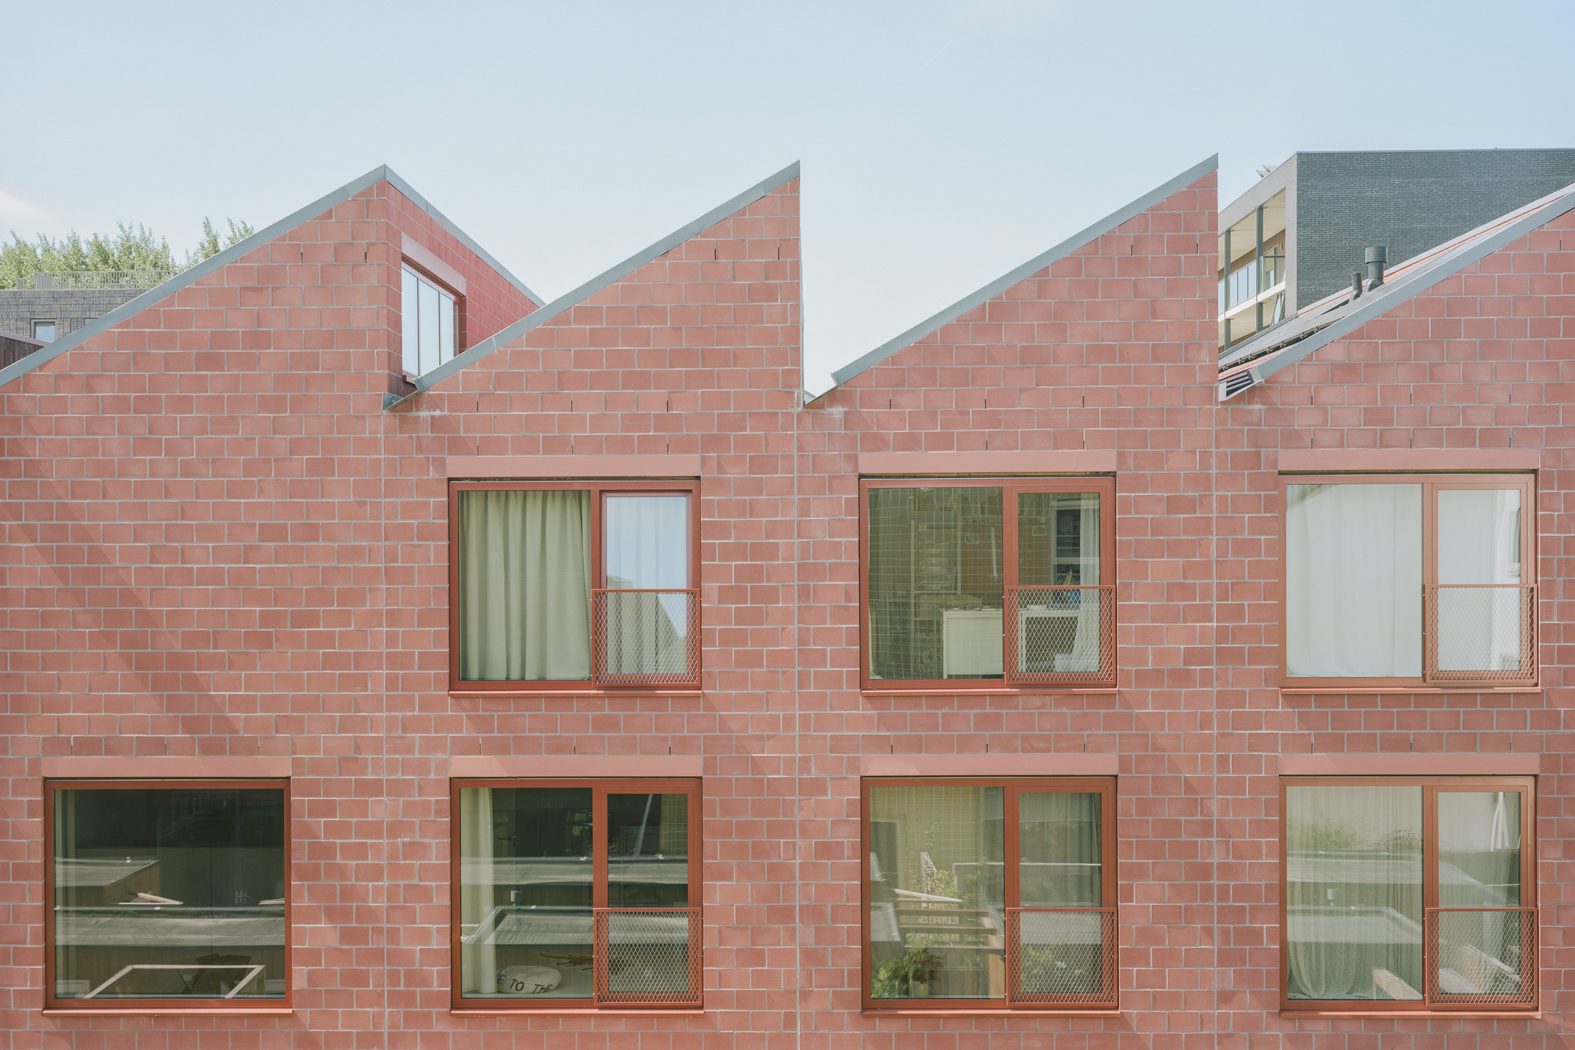 Wisselspoor - Wisselspoor red shed roof terraced housing - a project by Space Encounters Office for Architecture